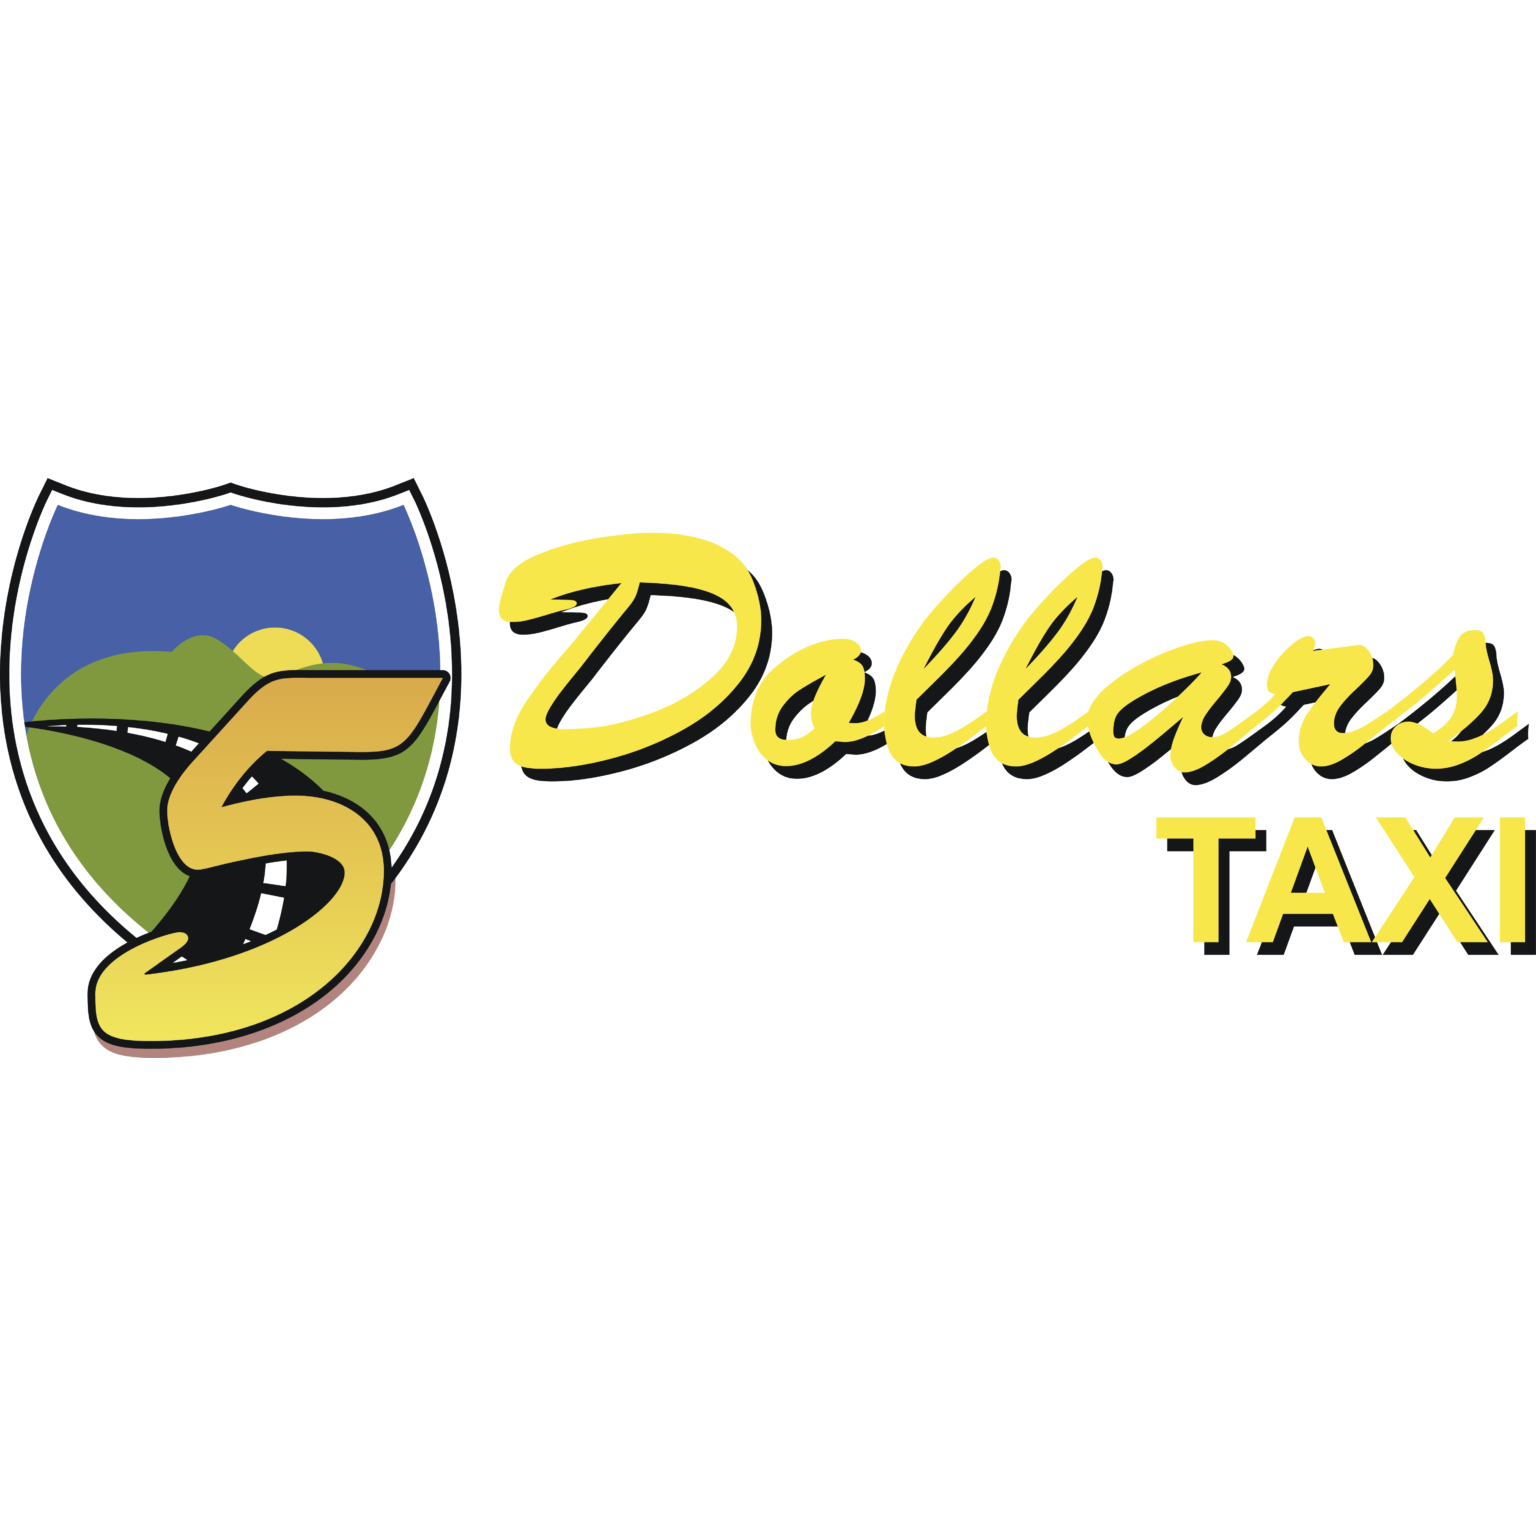 5 Dollars Taxi 2430 Franklin Dr Kissimmee, FL Taxis - MapQuest